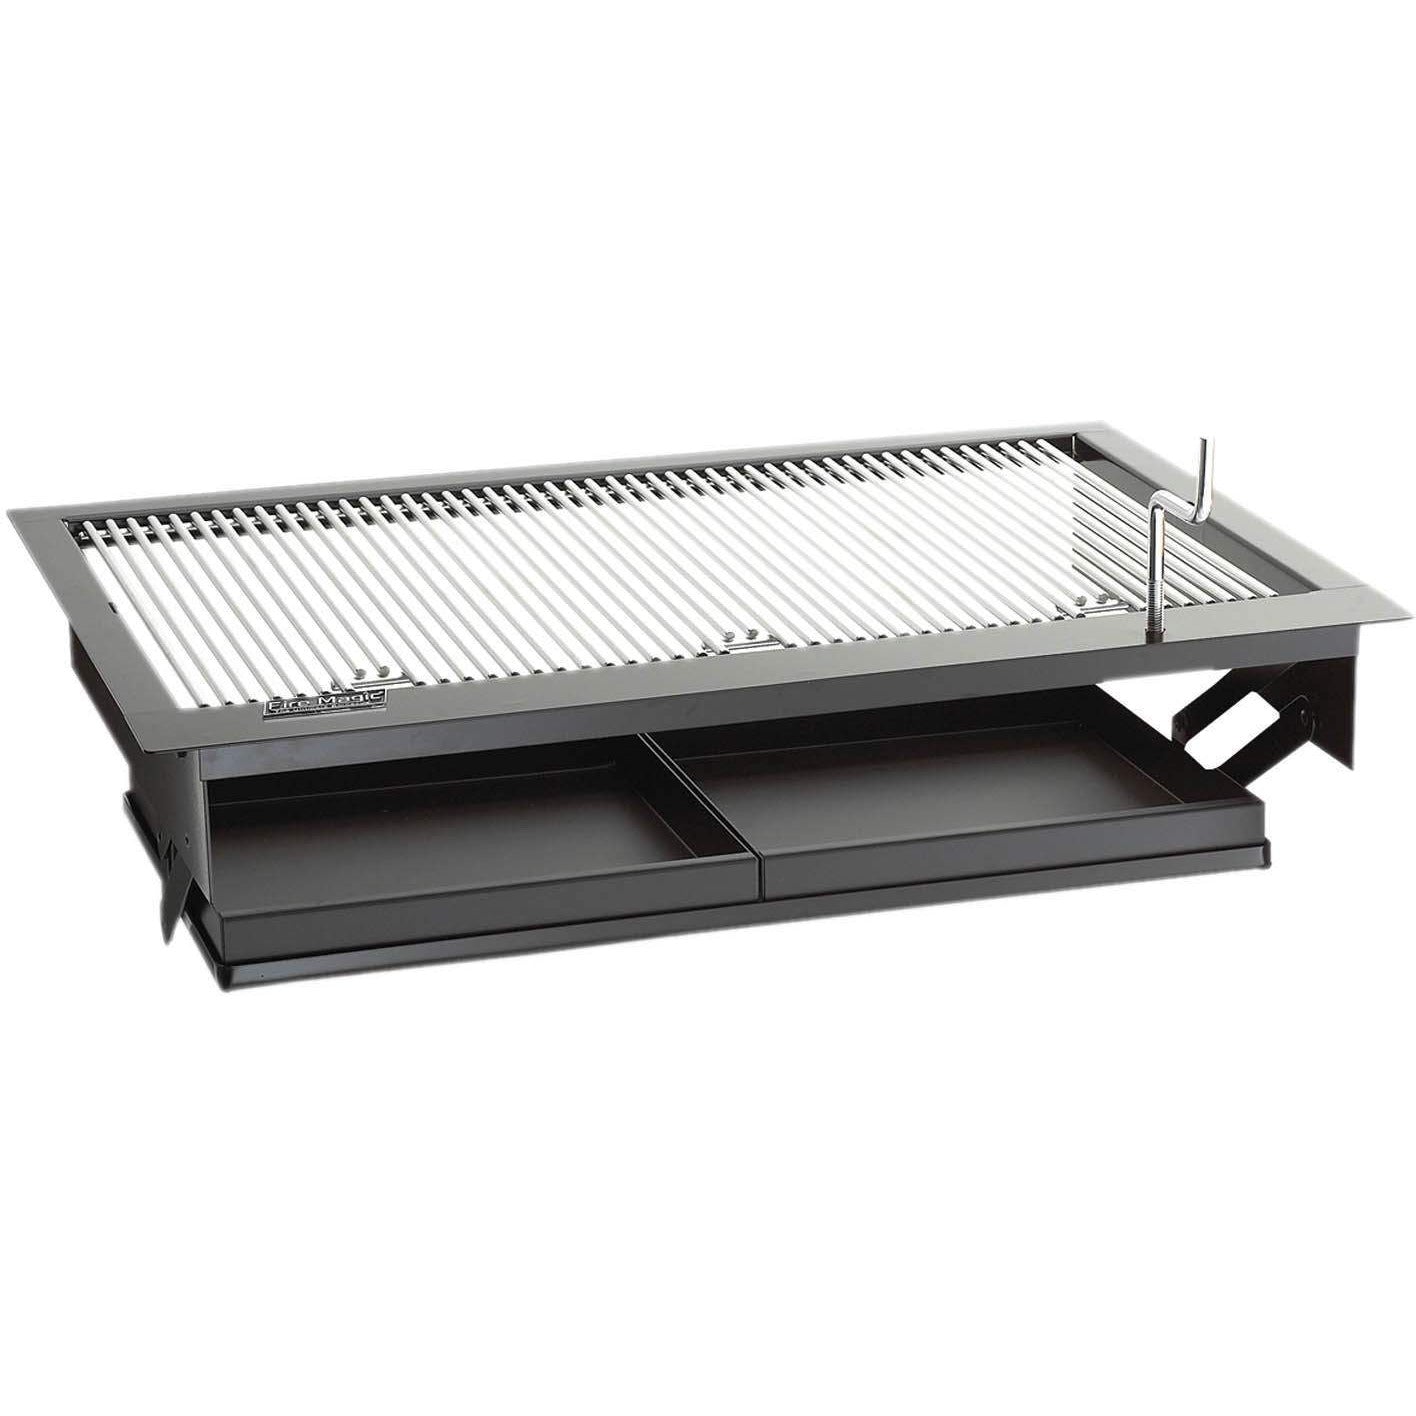 Fire Magic Firemaster 24" Drop-In Charcoal Grill 3329